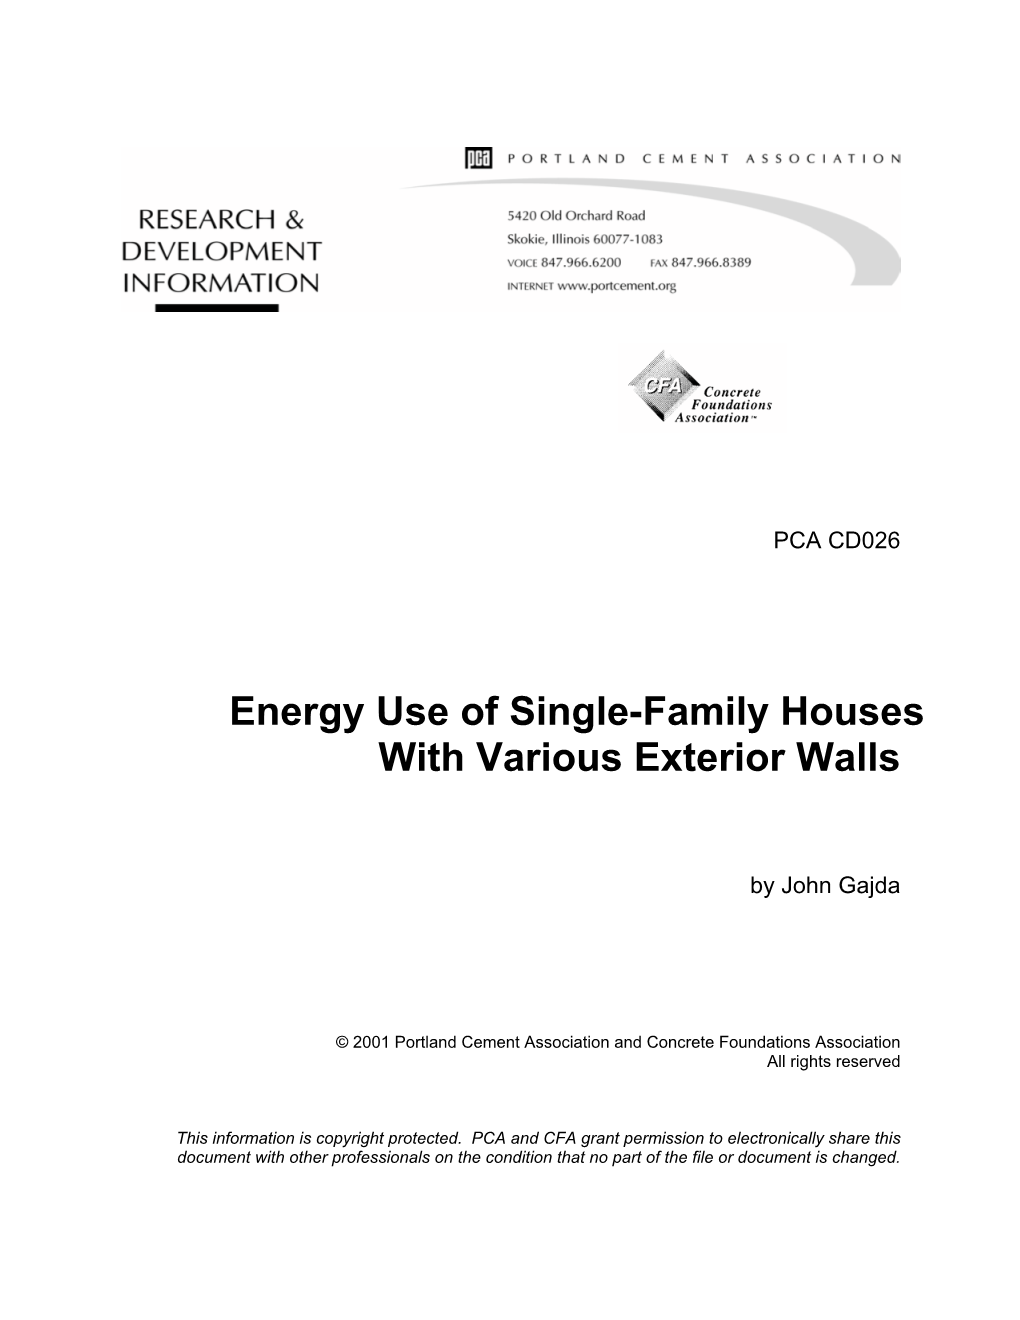 Energy Use of Single-Family Houses with Various Exterior Walls